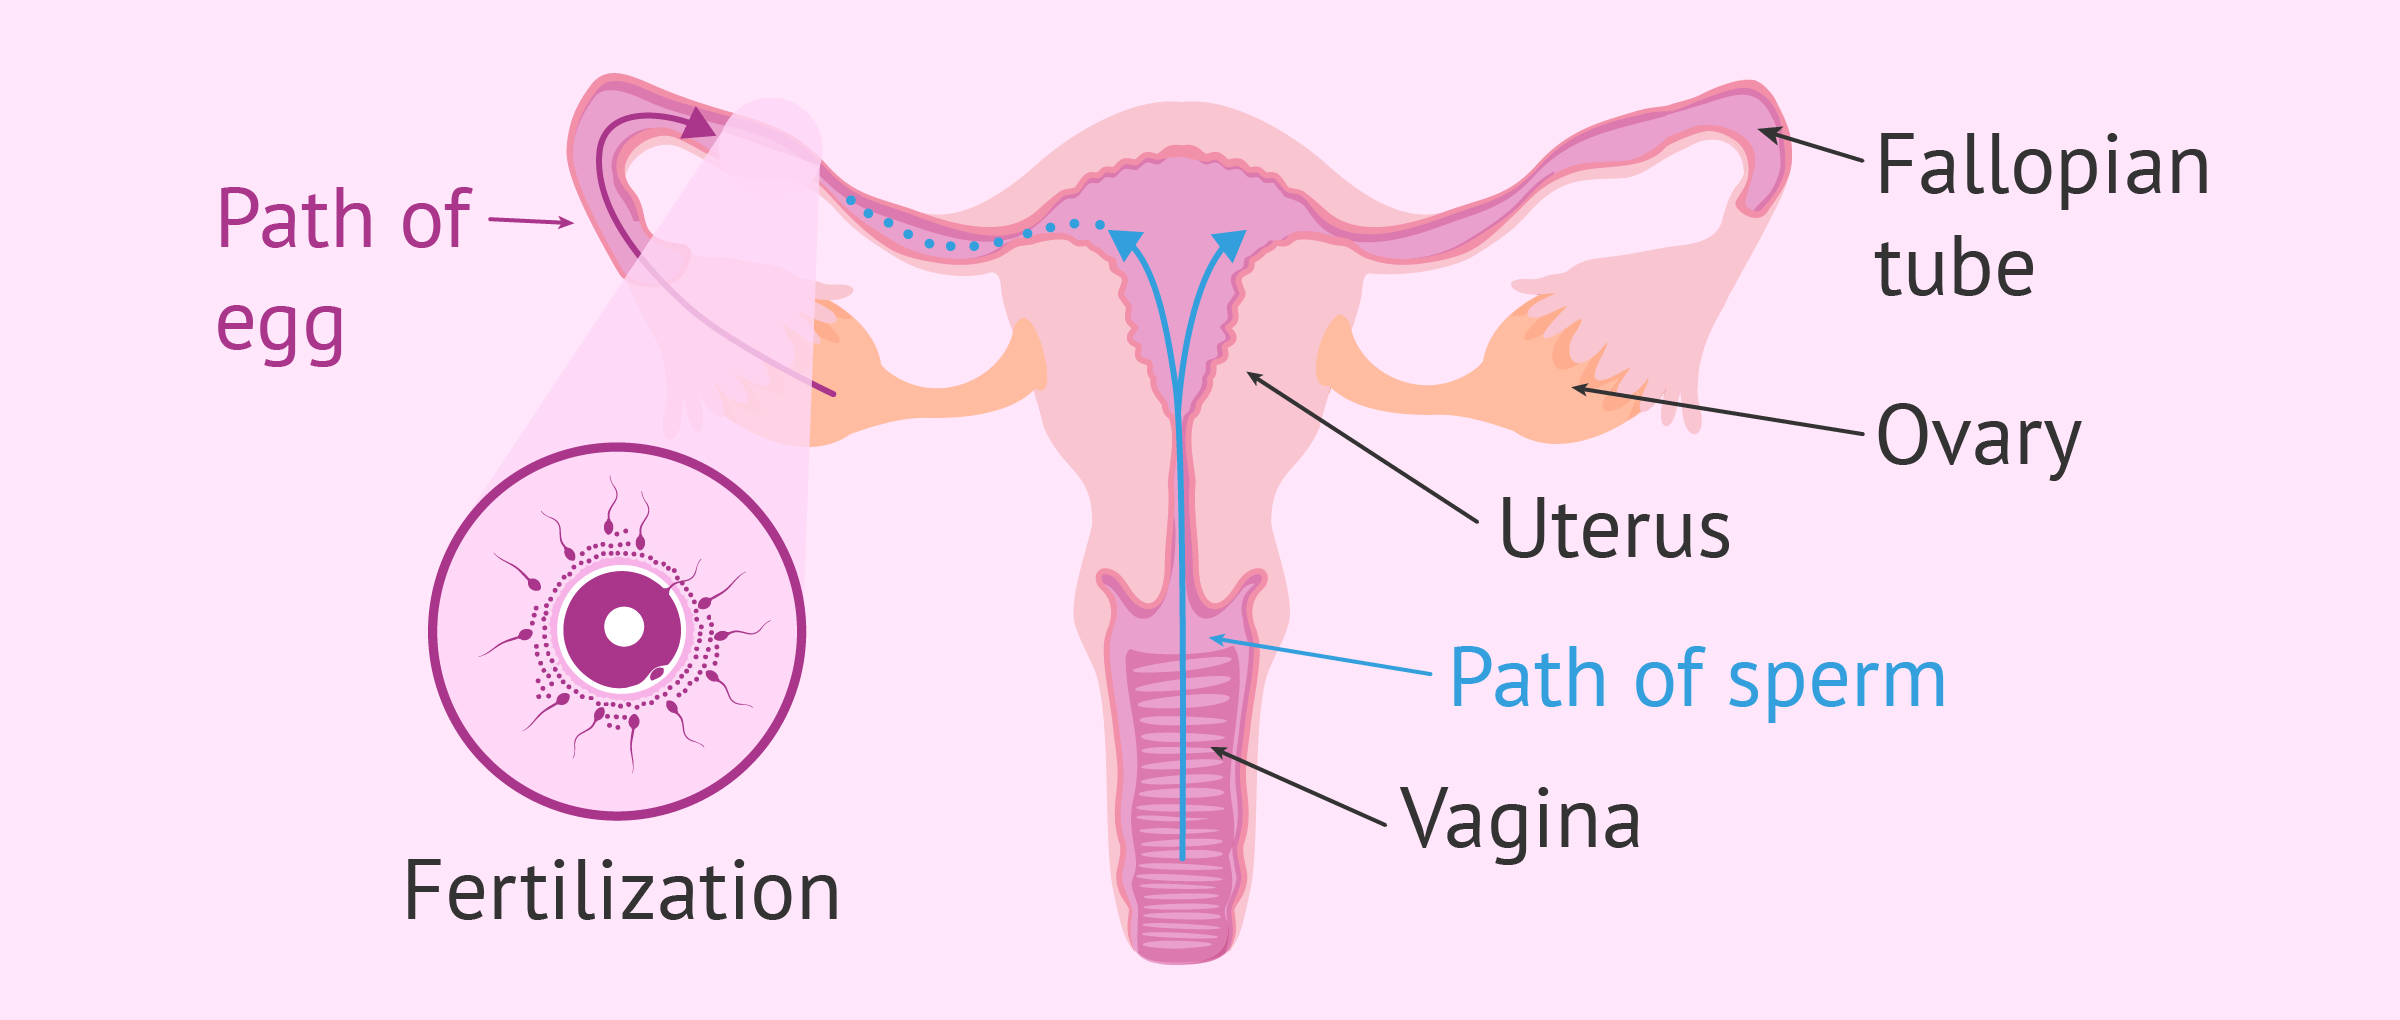 Sperm life in the vagina